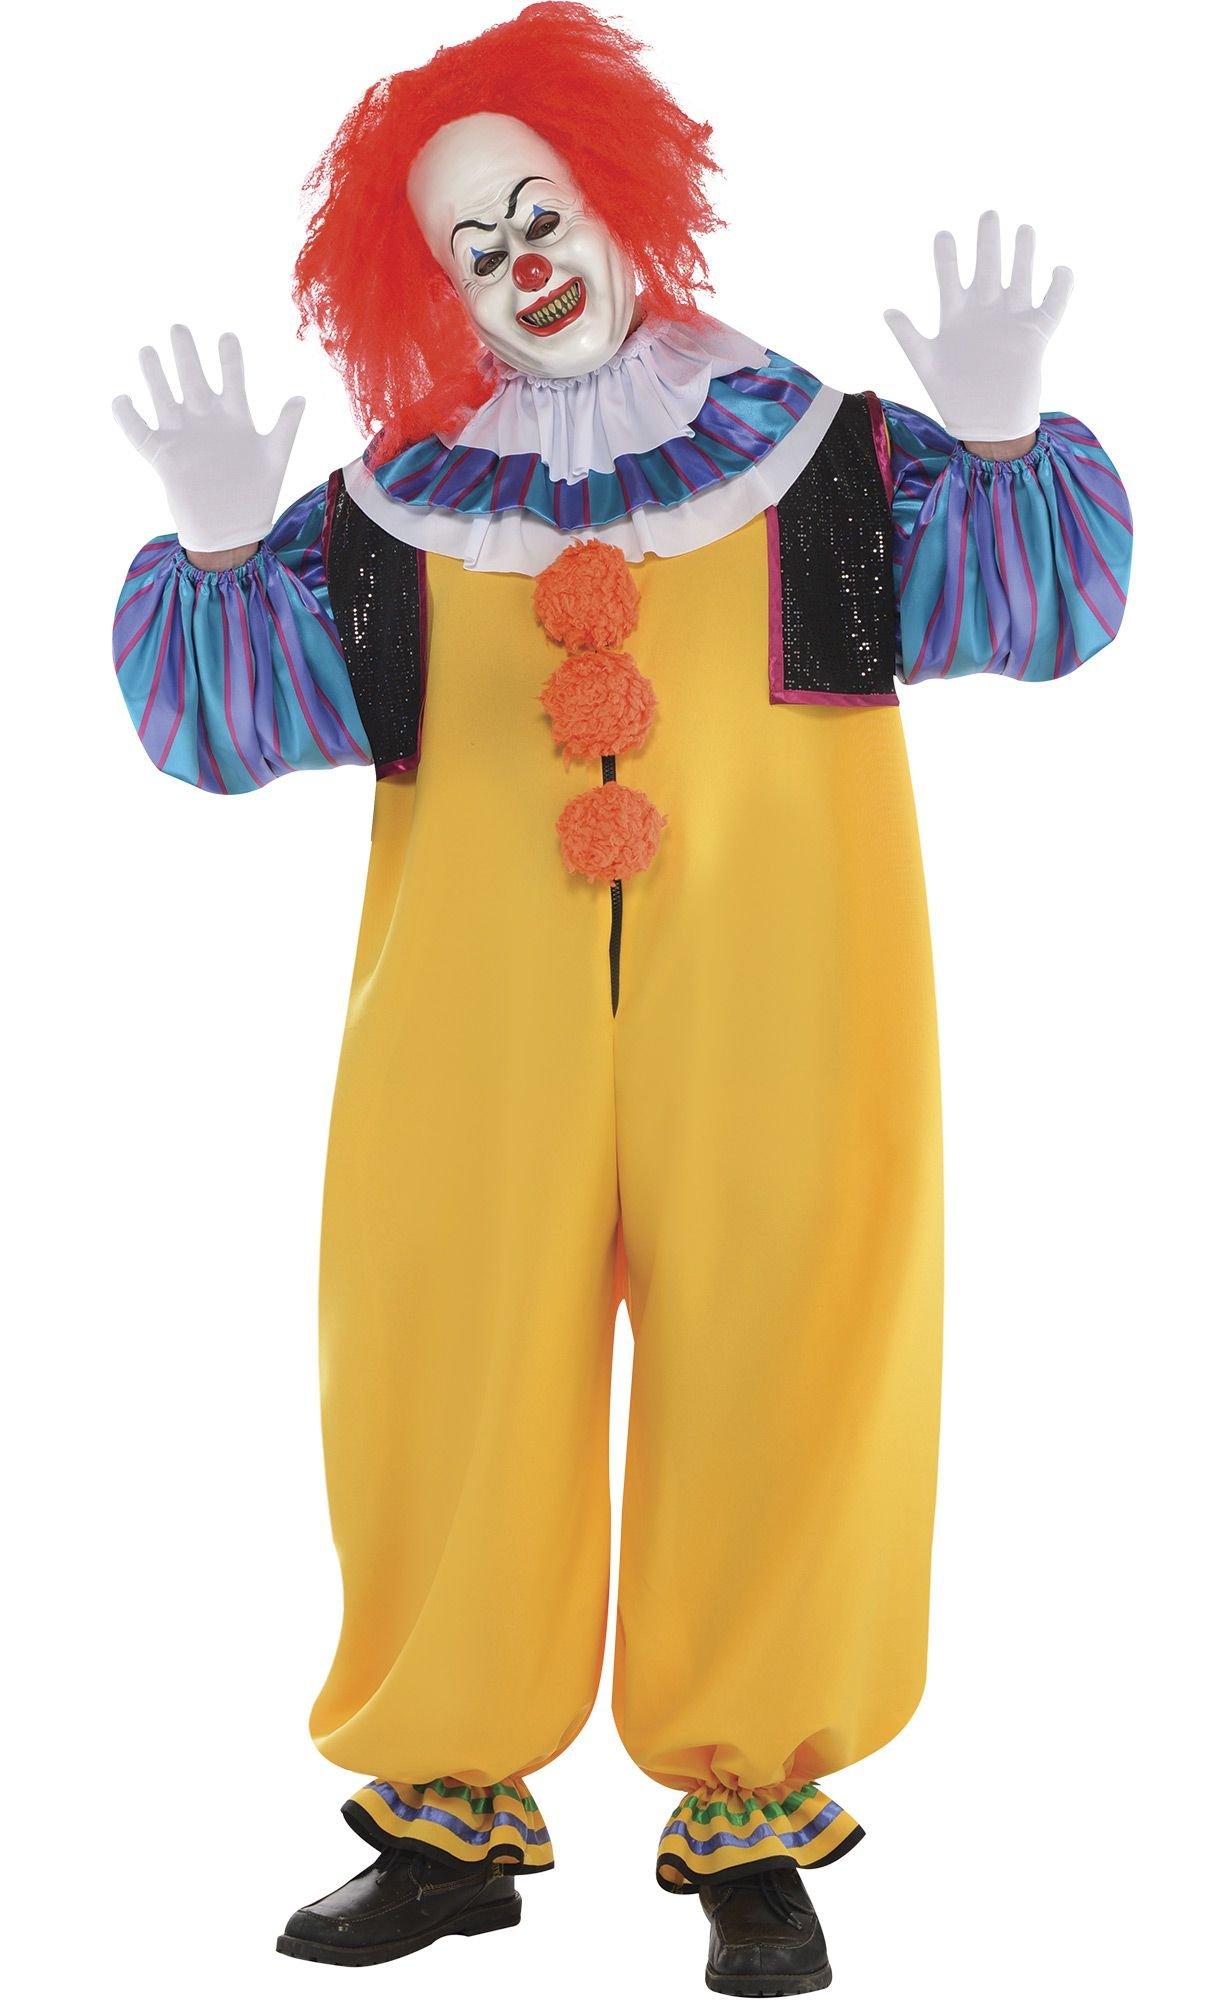 pennywise the clown costume